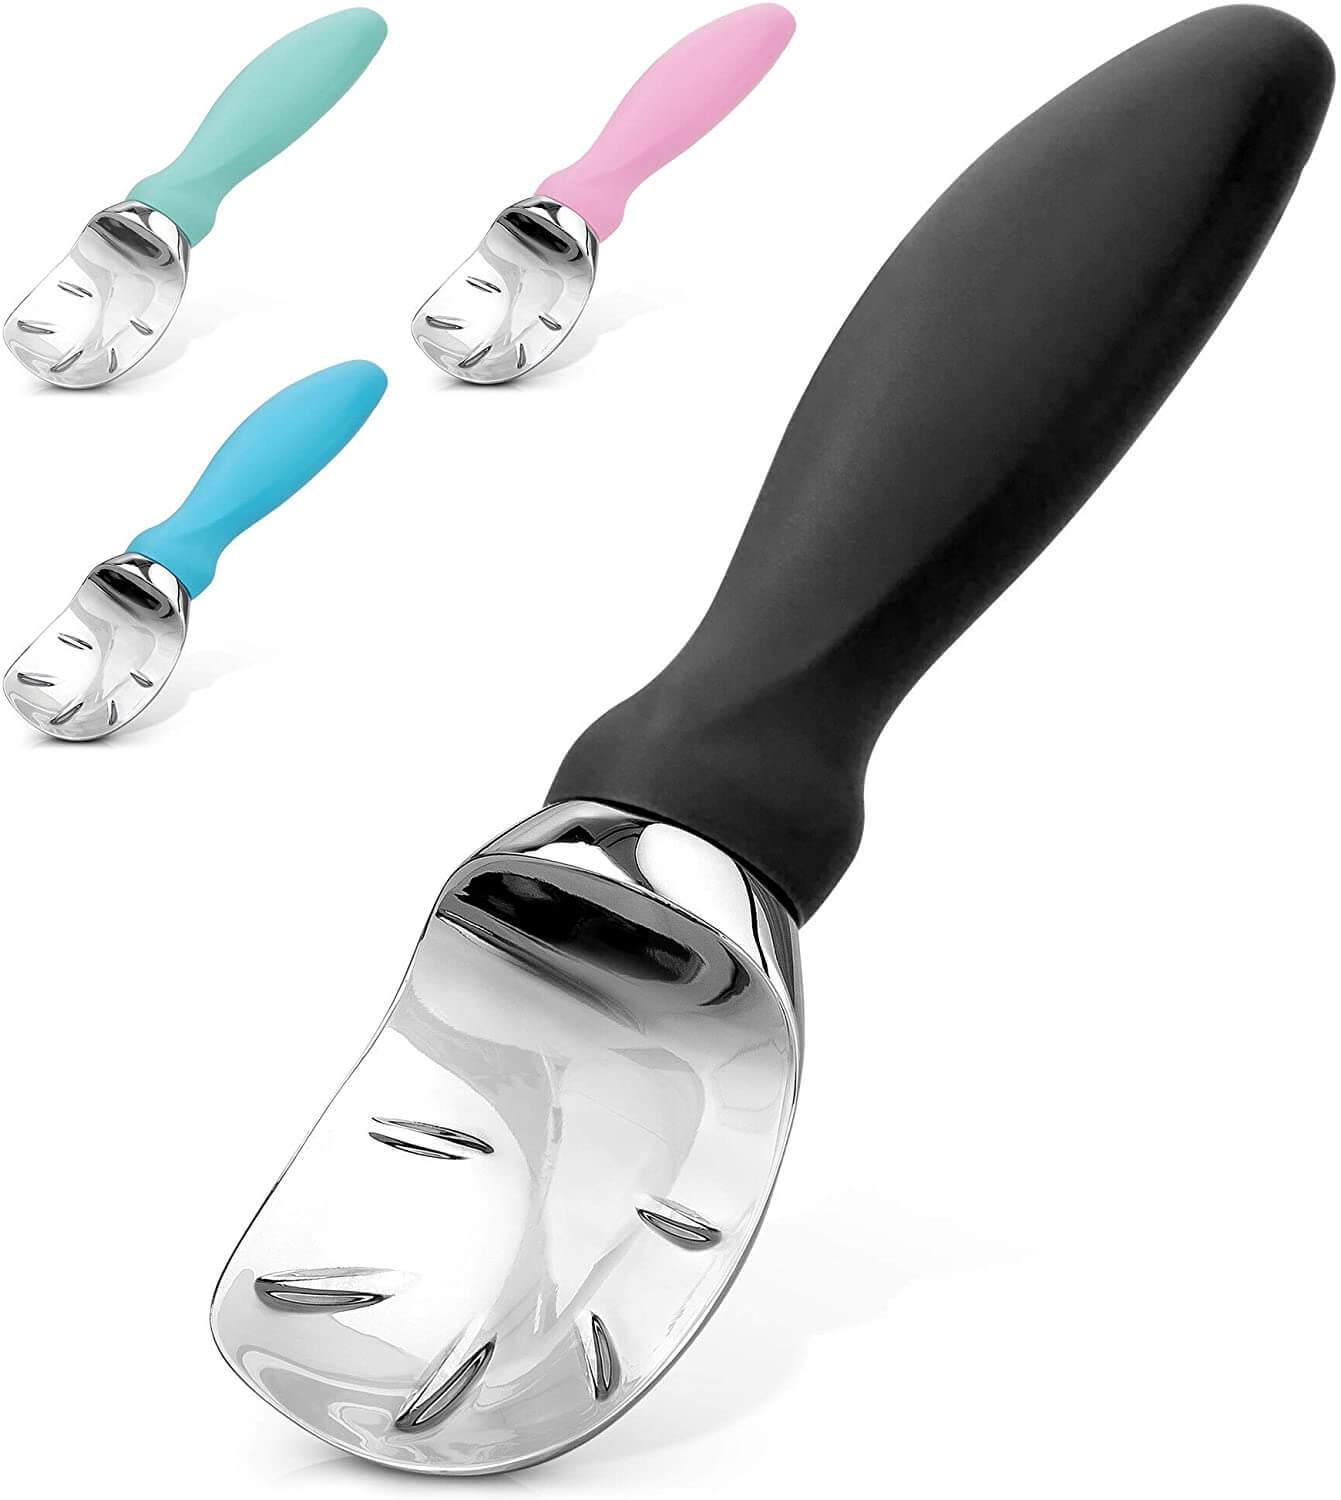 1pc Ice Cream Scoop Professional Heavy Duty Sturdy Scooper With Soft Grip  Handle For Cookie Dough Gelato And Sorbet Kitchen Tool, Free Shipping,  Free Returns